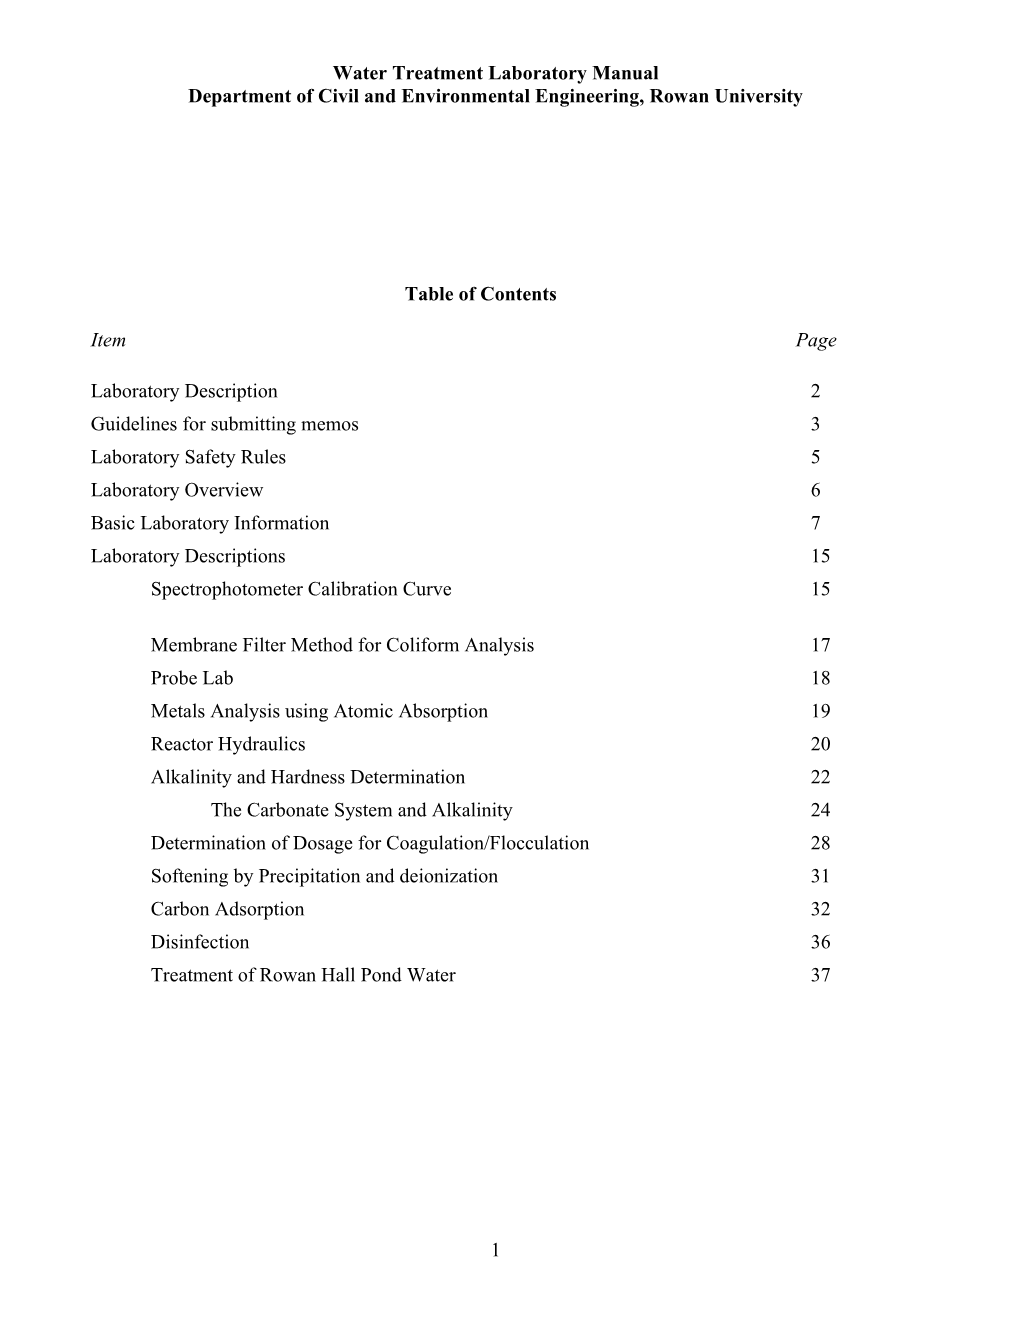 Table of Contents s41